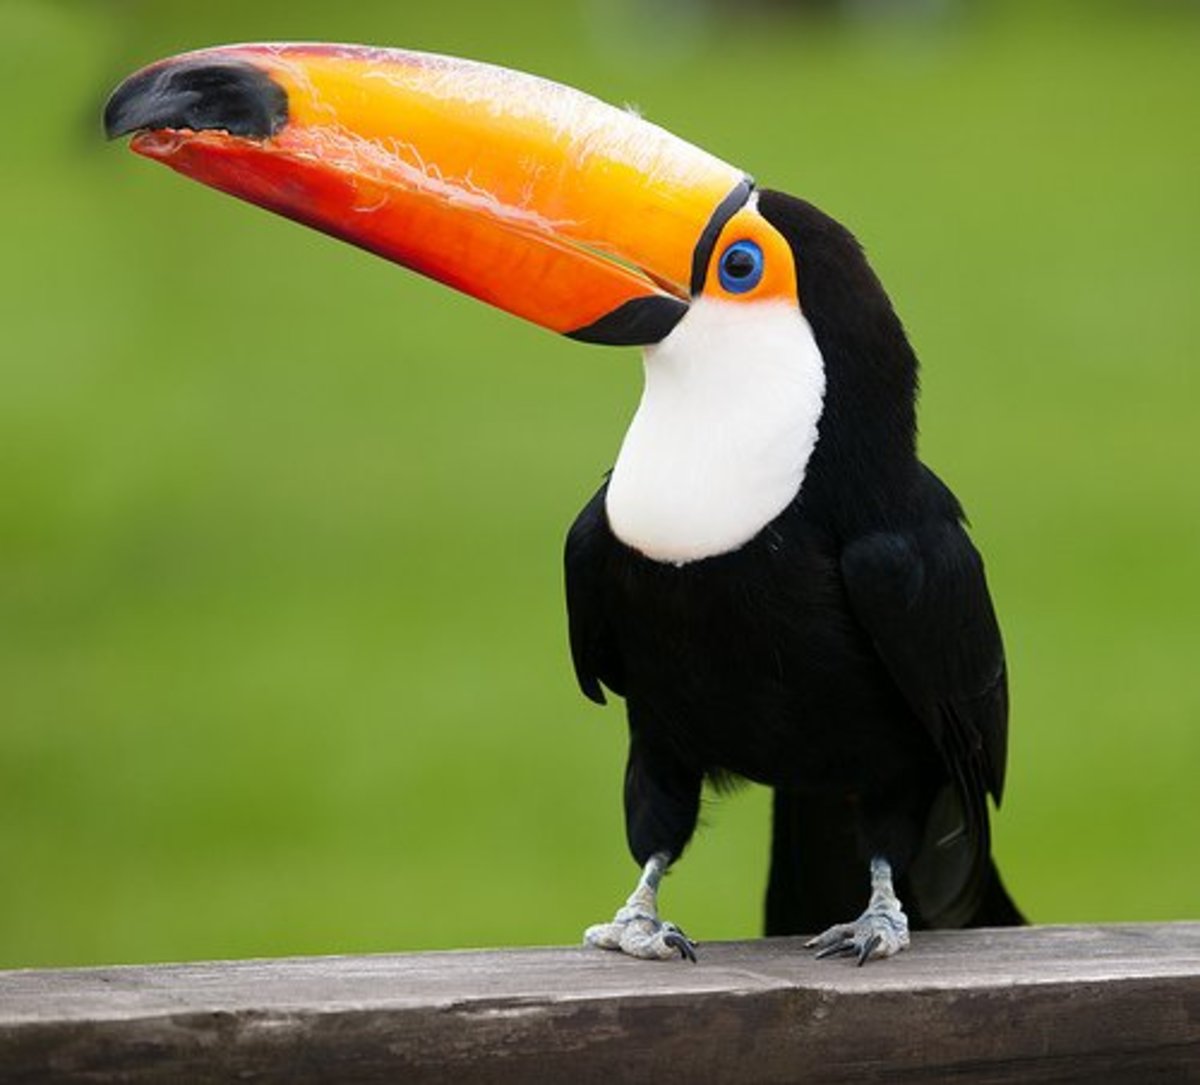 The toucan is a pretty odd looking bird that comes from the forests of South America.